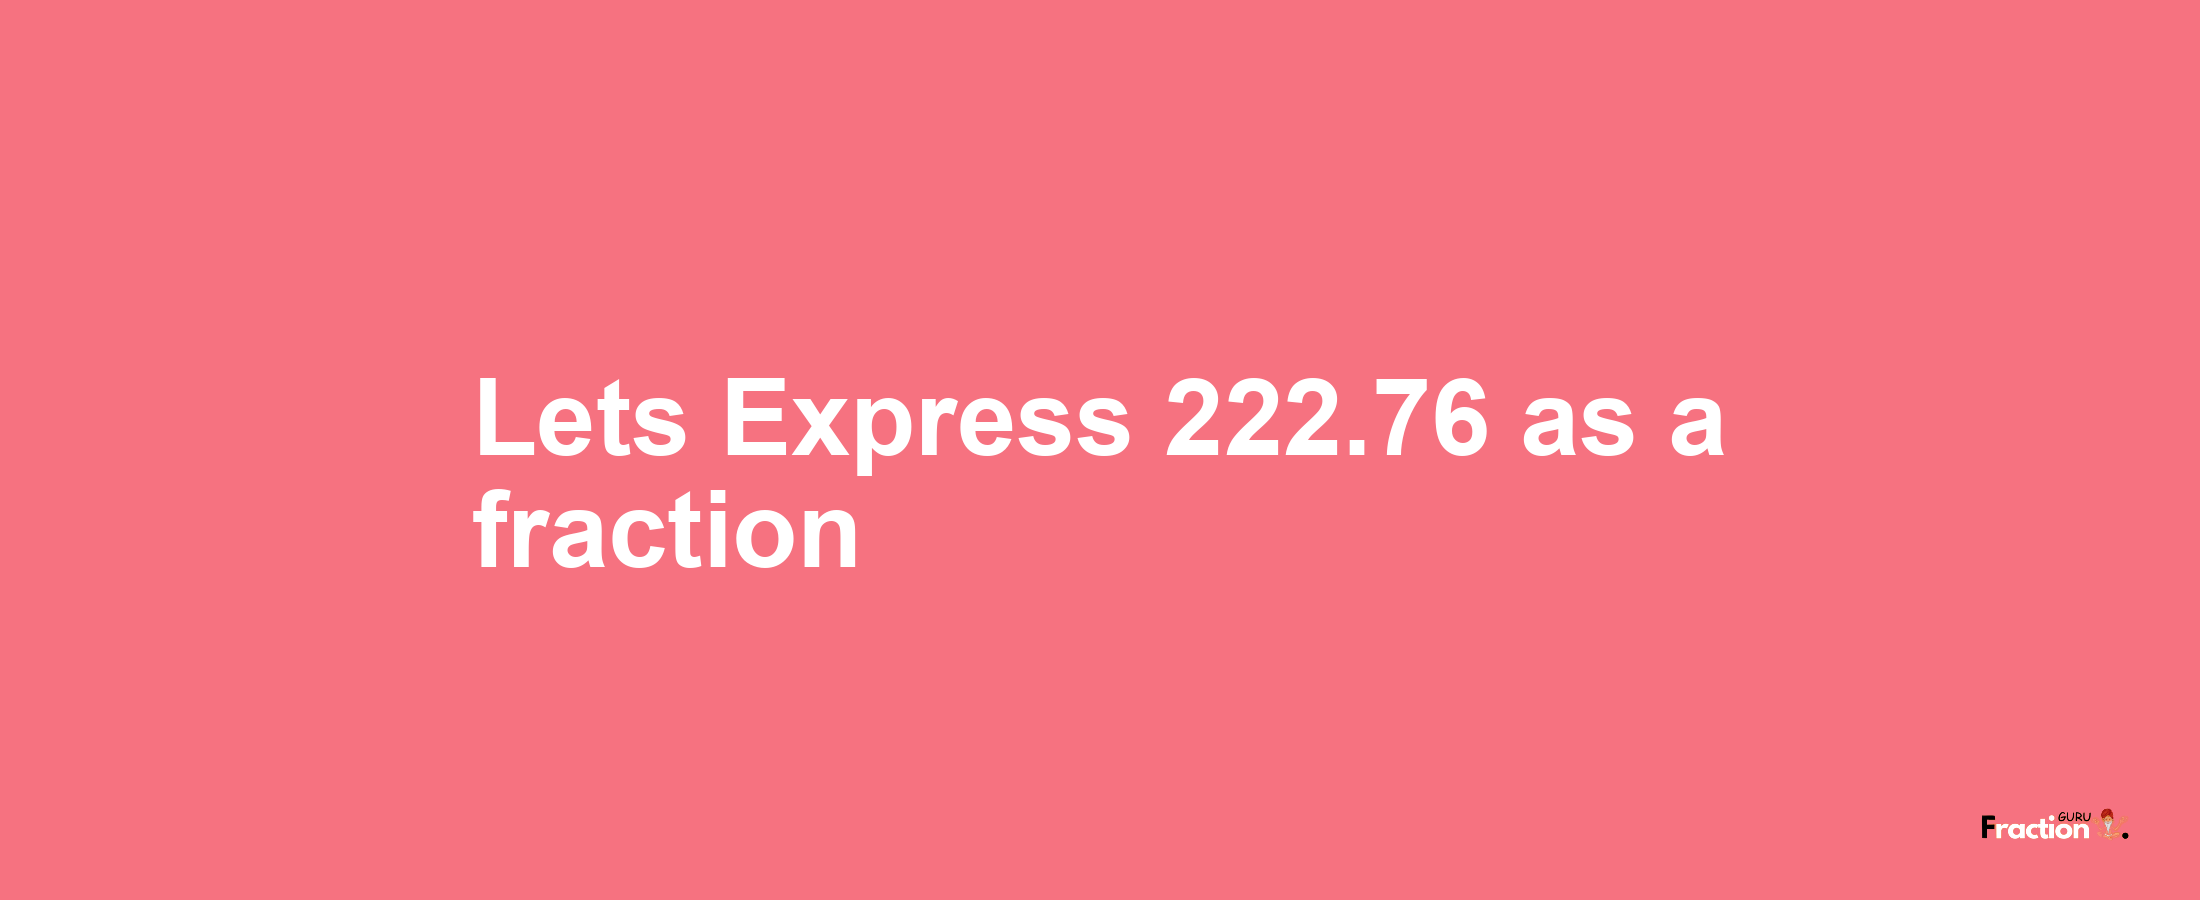 Lets Express 222.76 as afraction